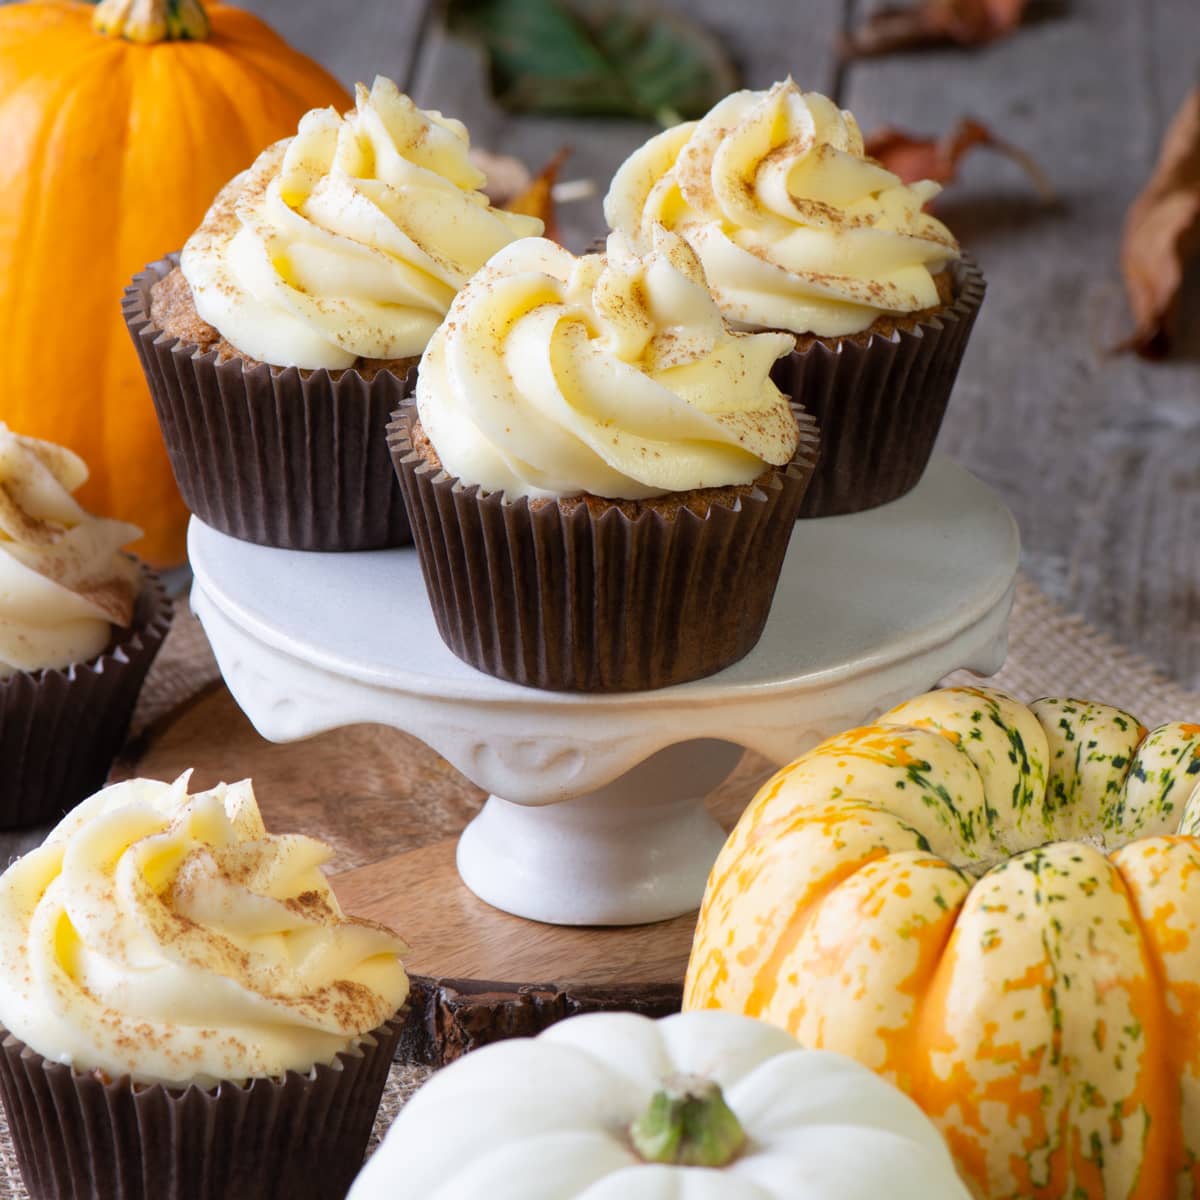 Three frosted pumpkin cupcakes shown on a white cake stand surrounded by small pumpkins.  